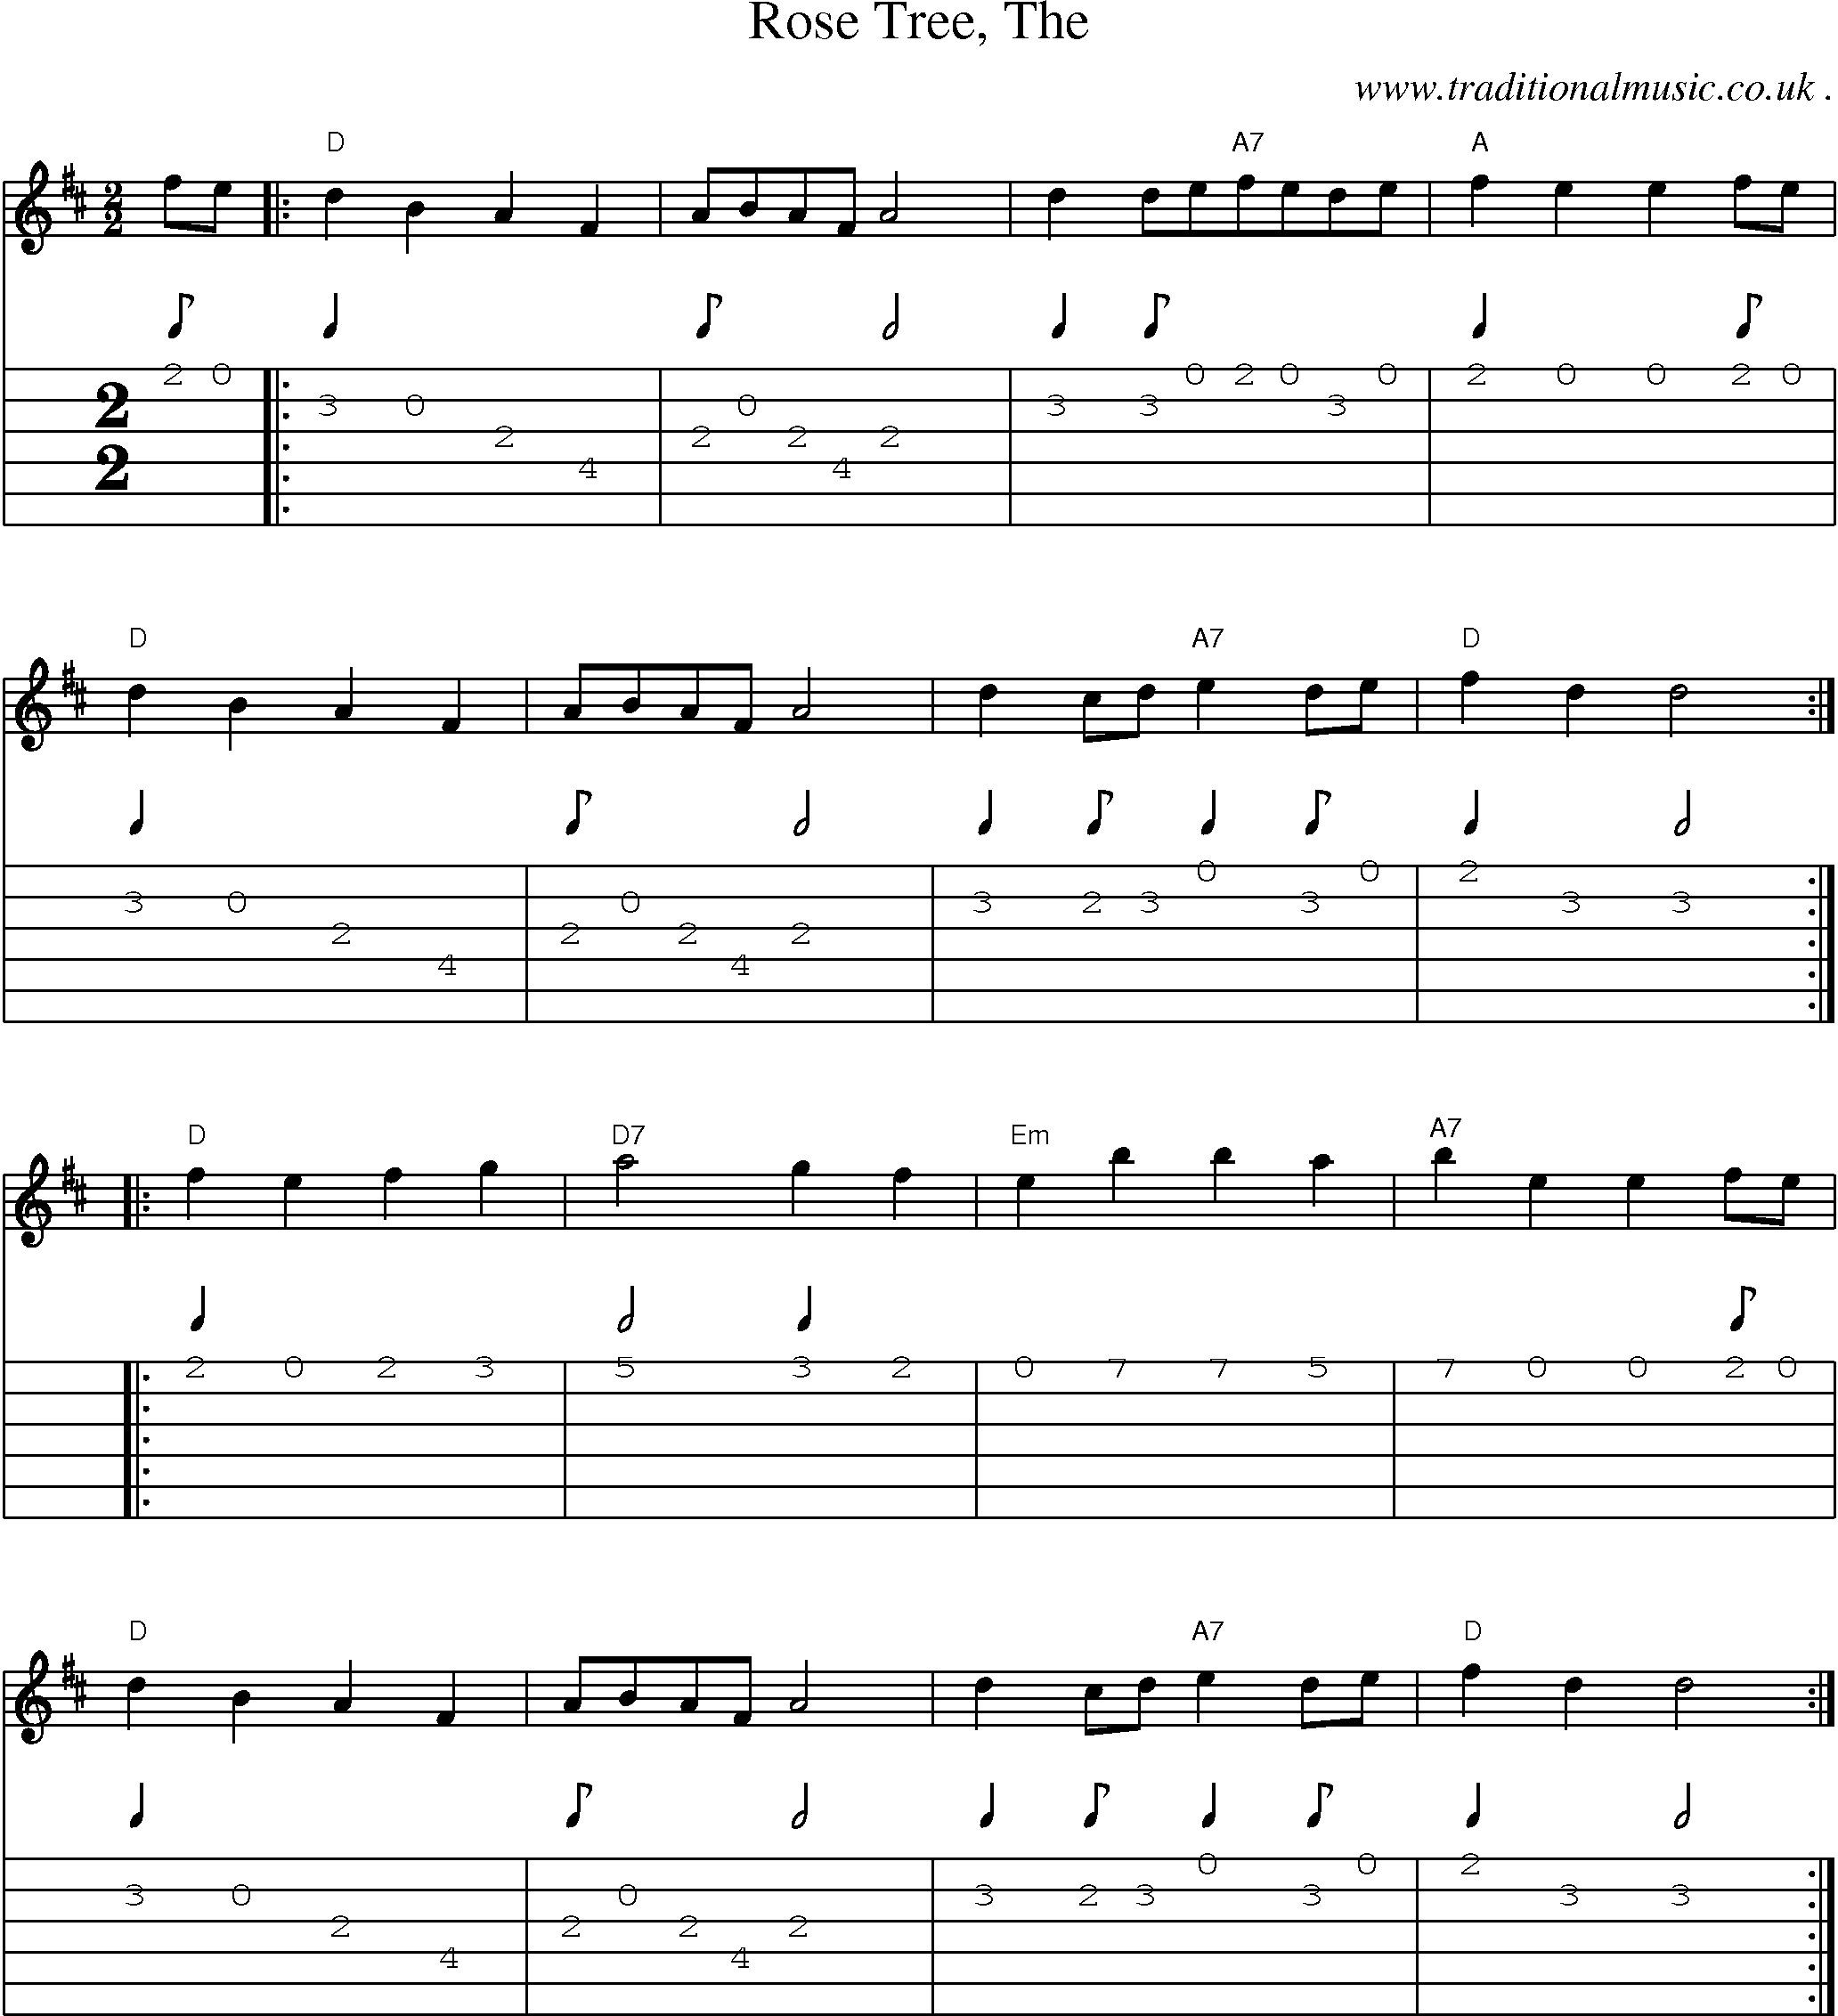 Music Score and Guitar Tabs for Rose Tree The1